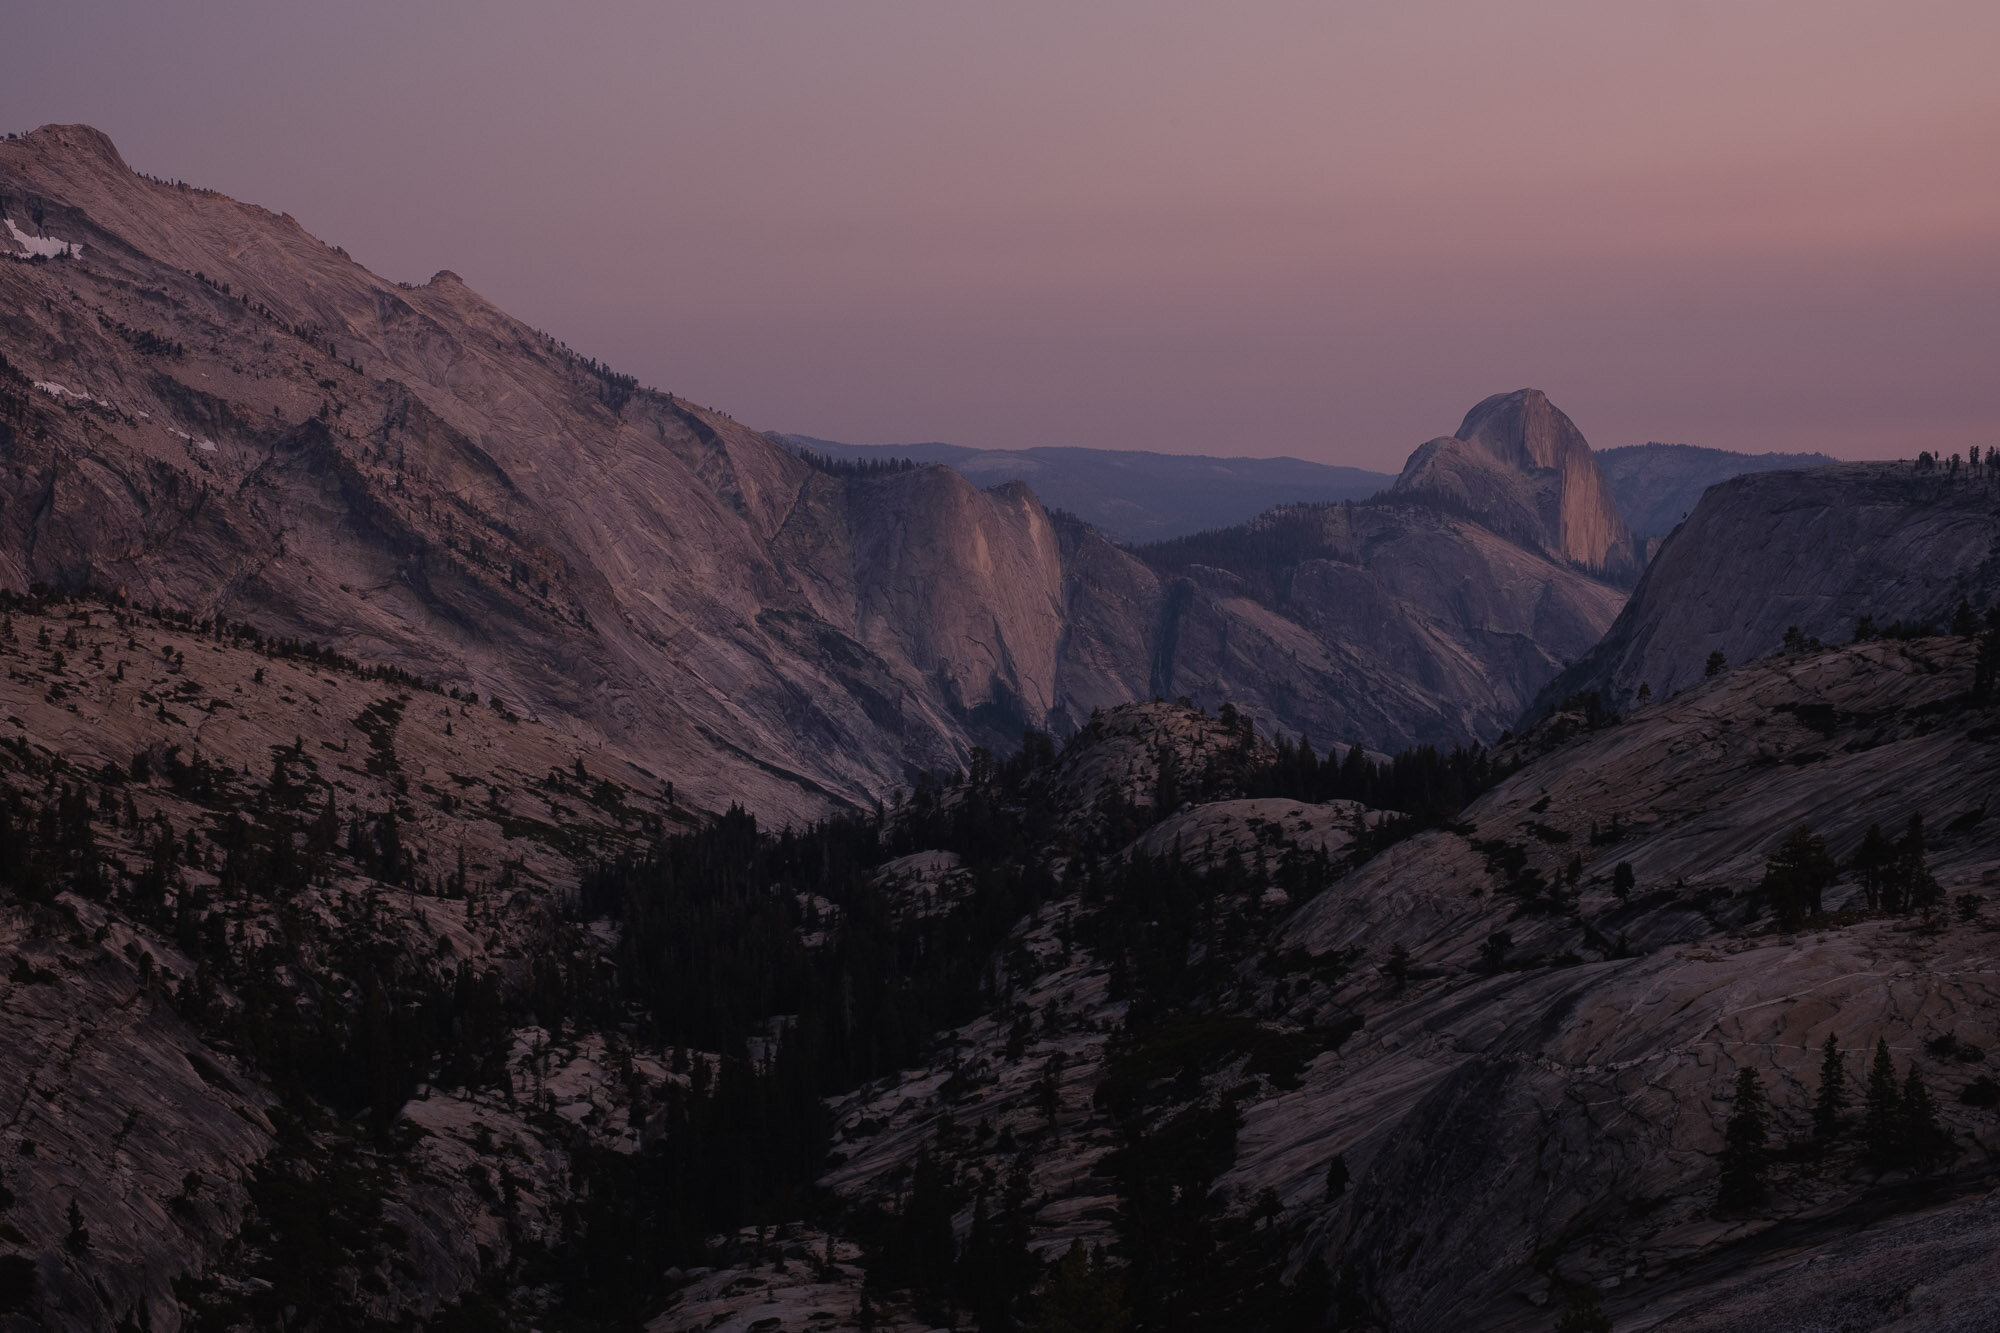 After Sunset in Yosemite